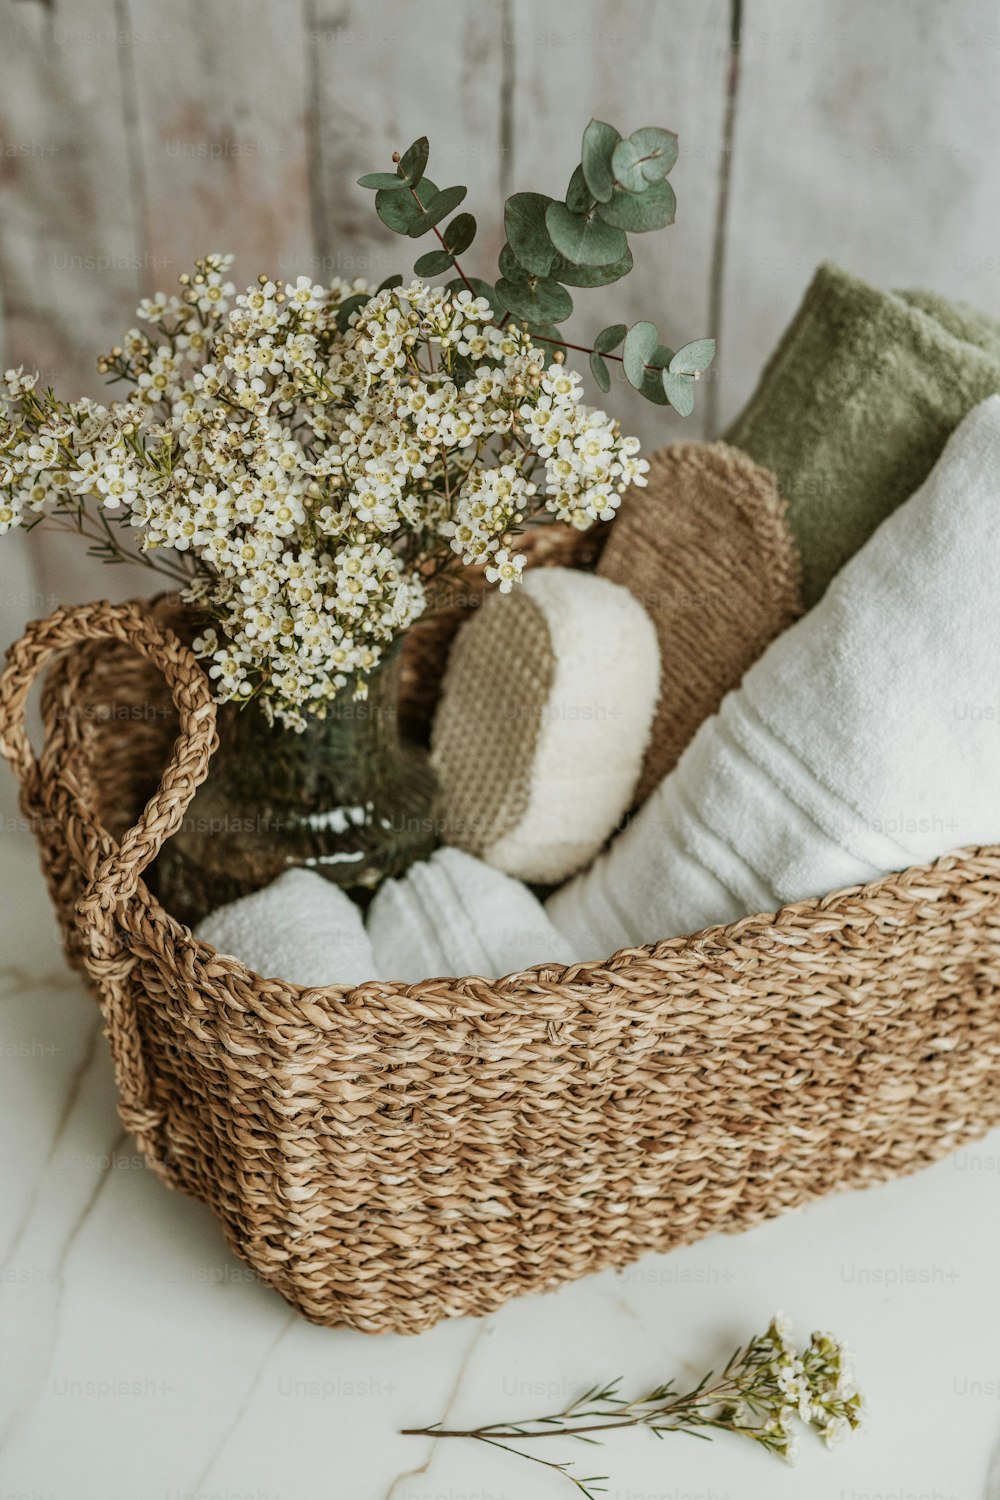 a basket filled with towels and a vase filled with flowers